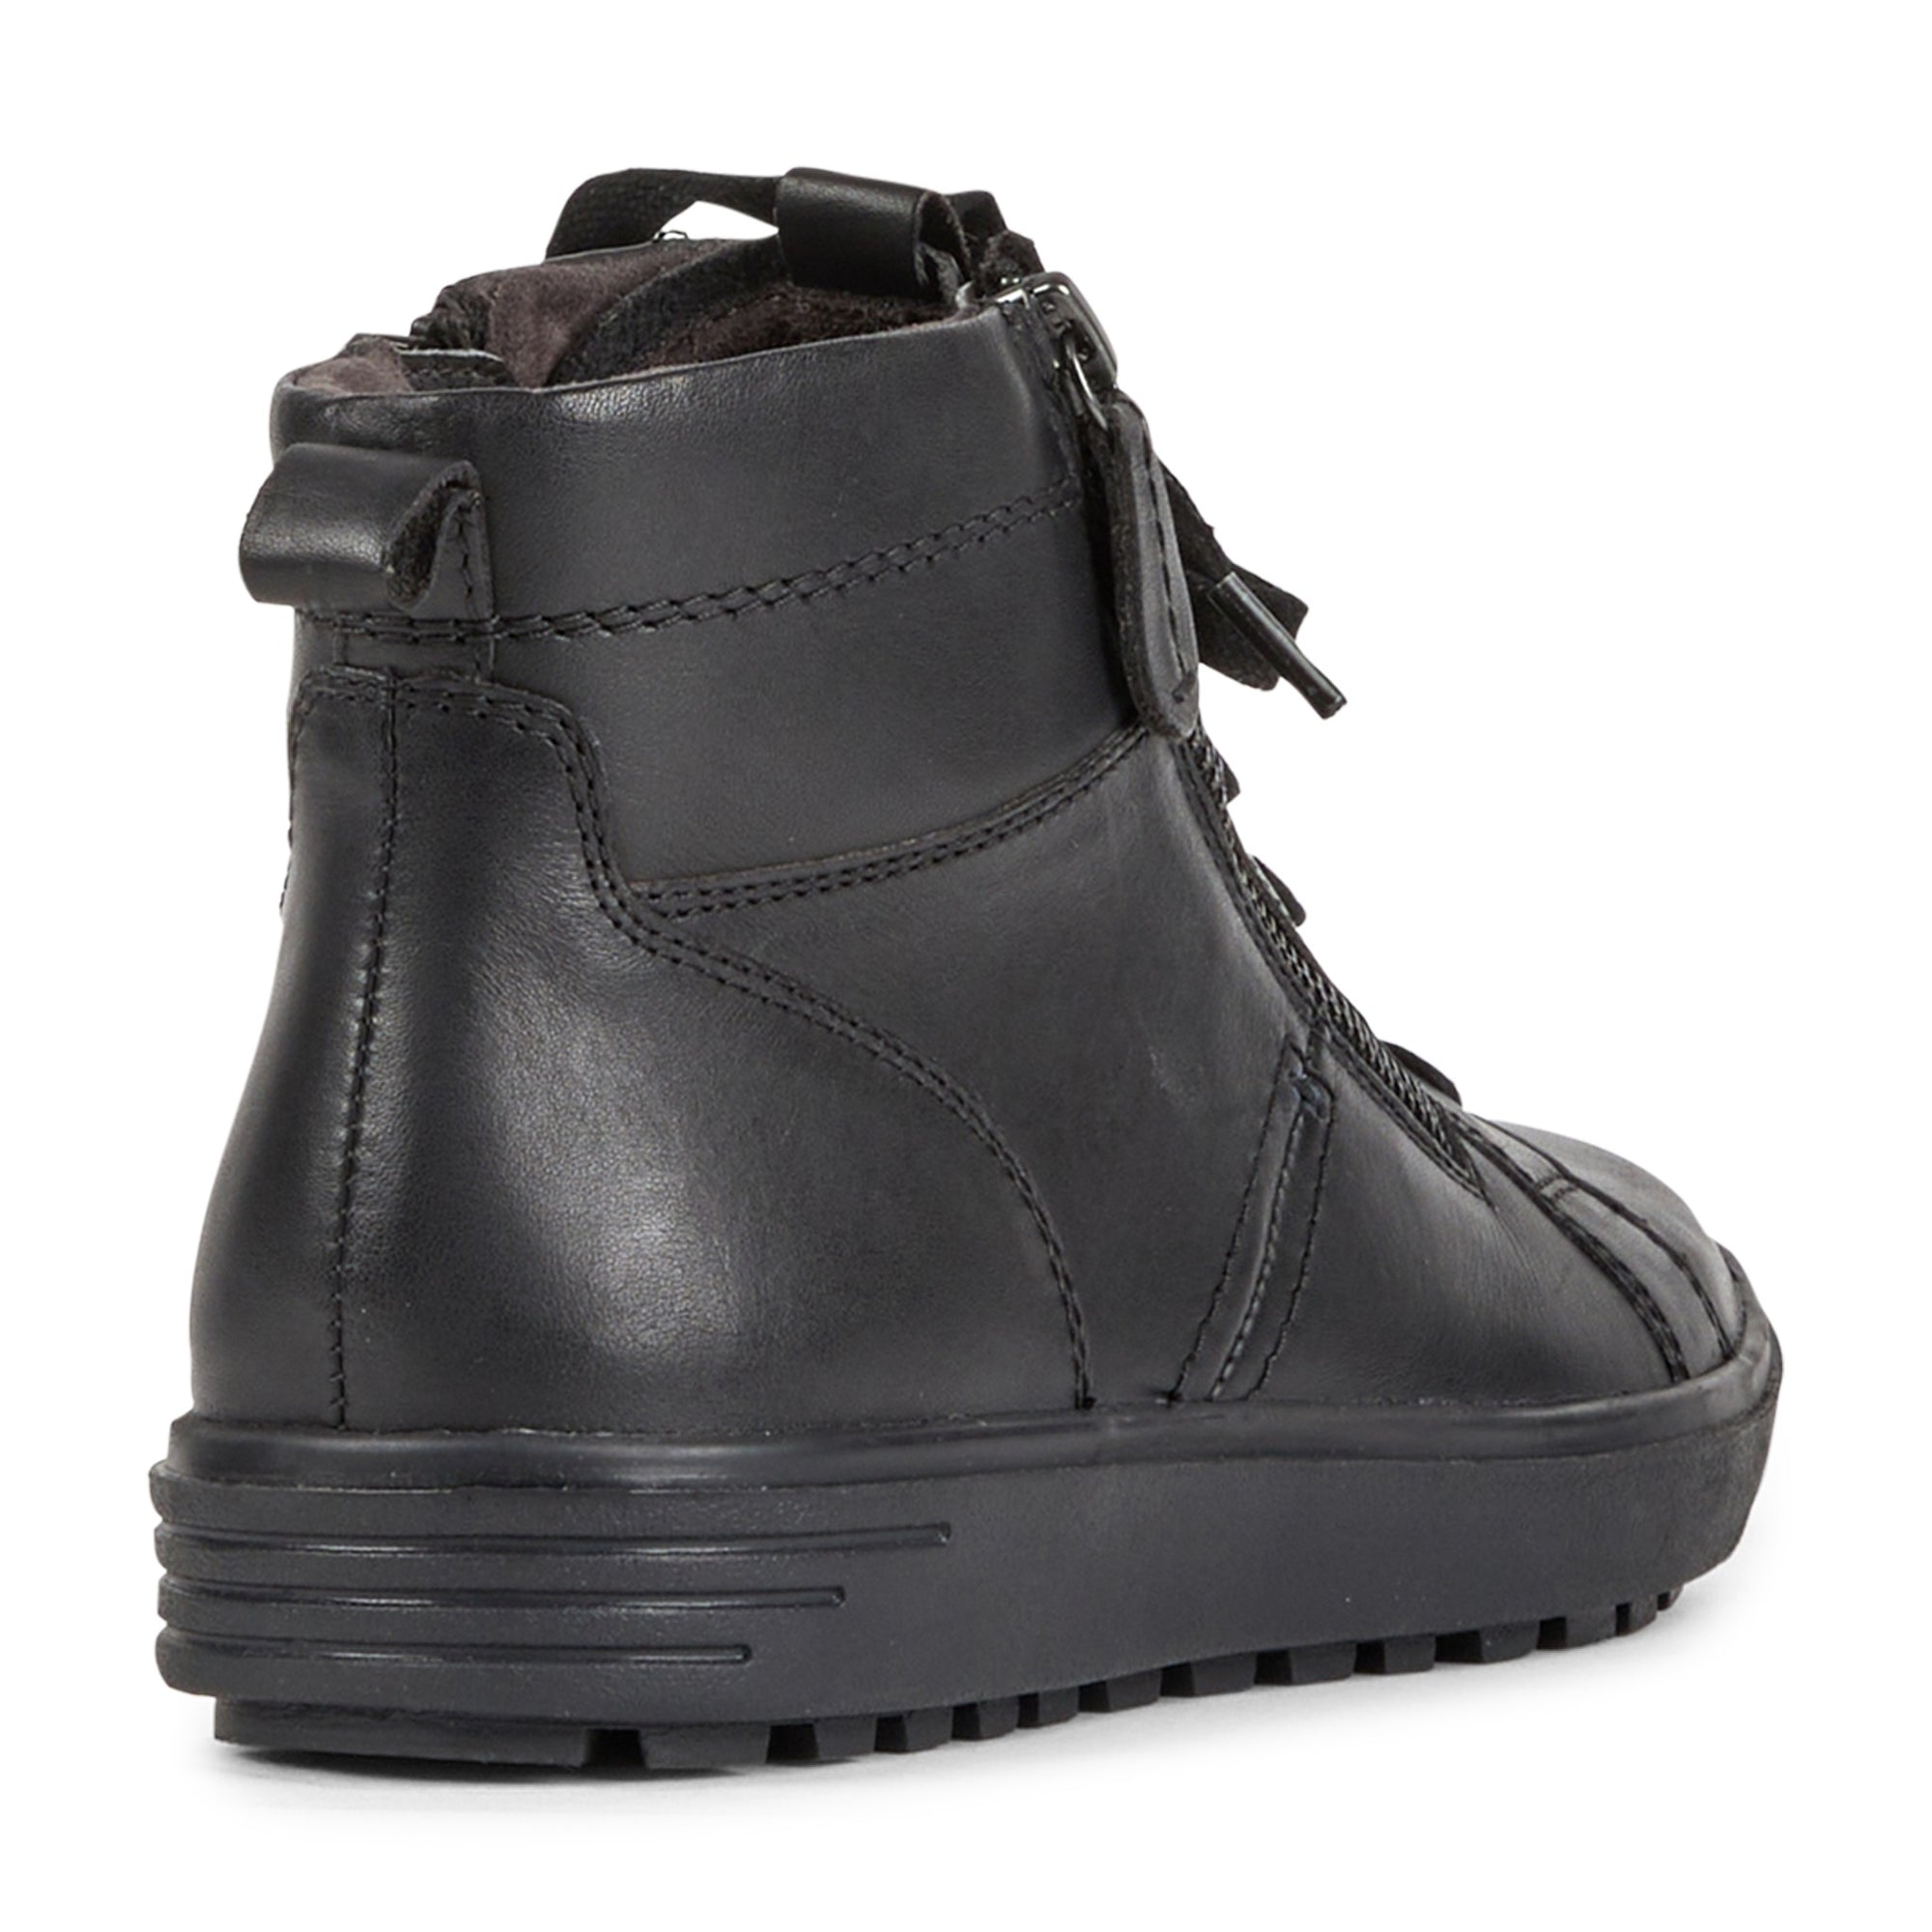 Buy quality Koni - BLACK Ankle Boots from Planet shoes